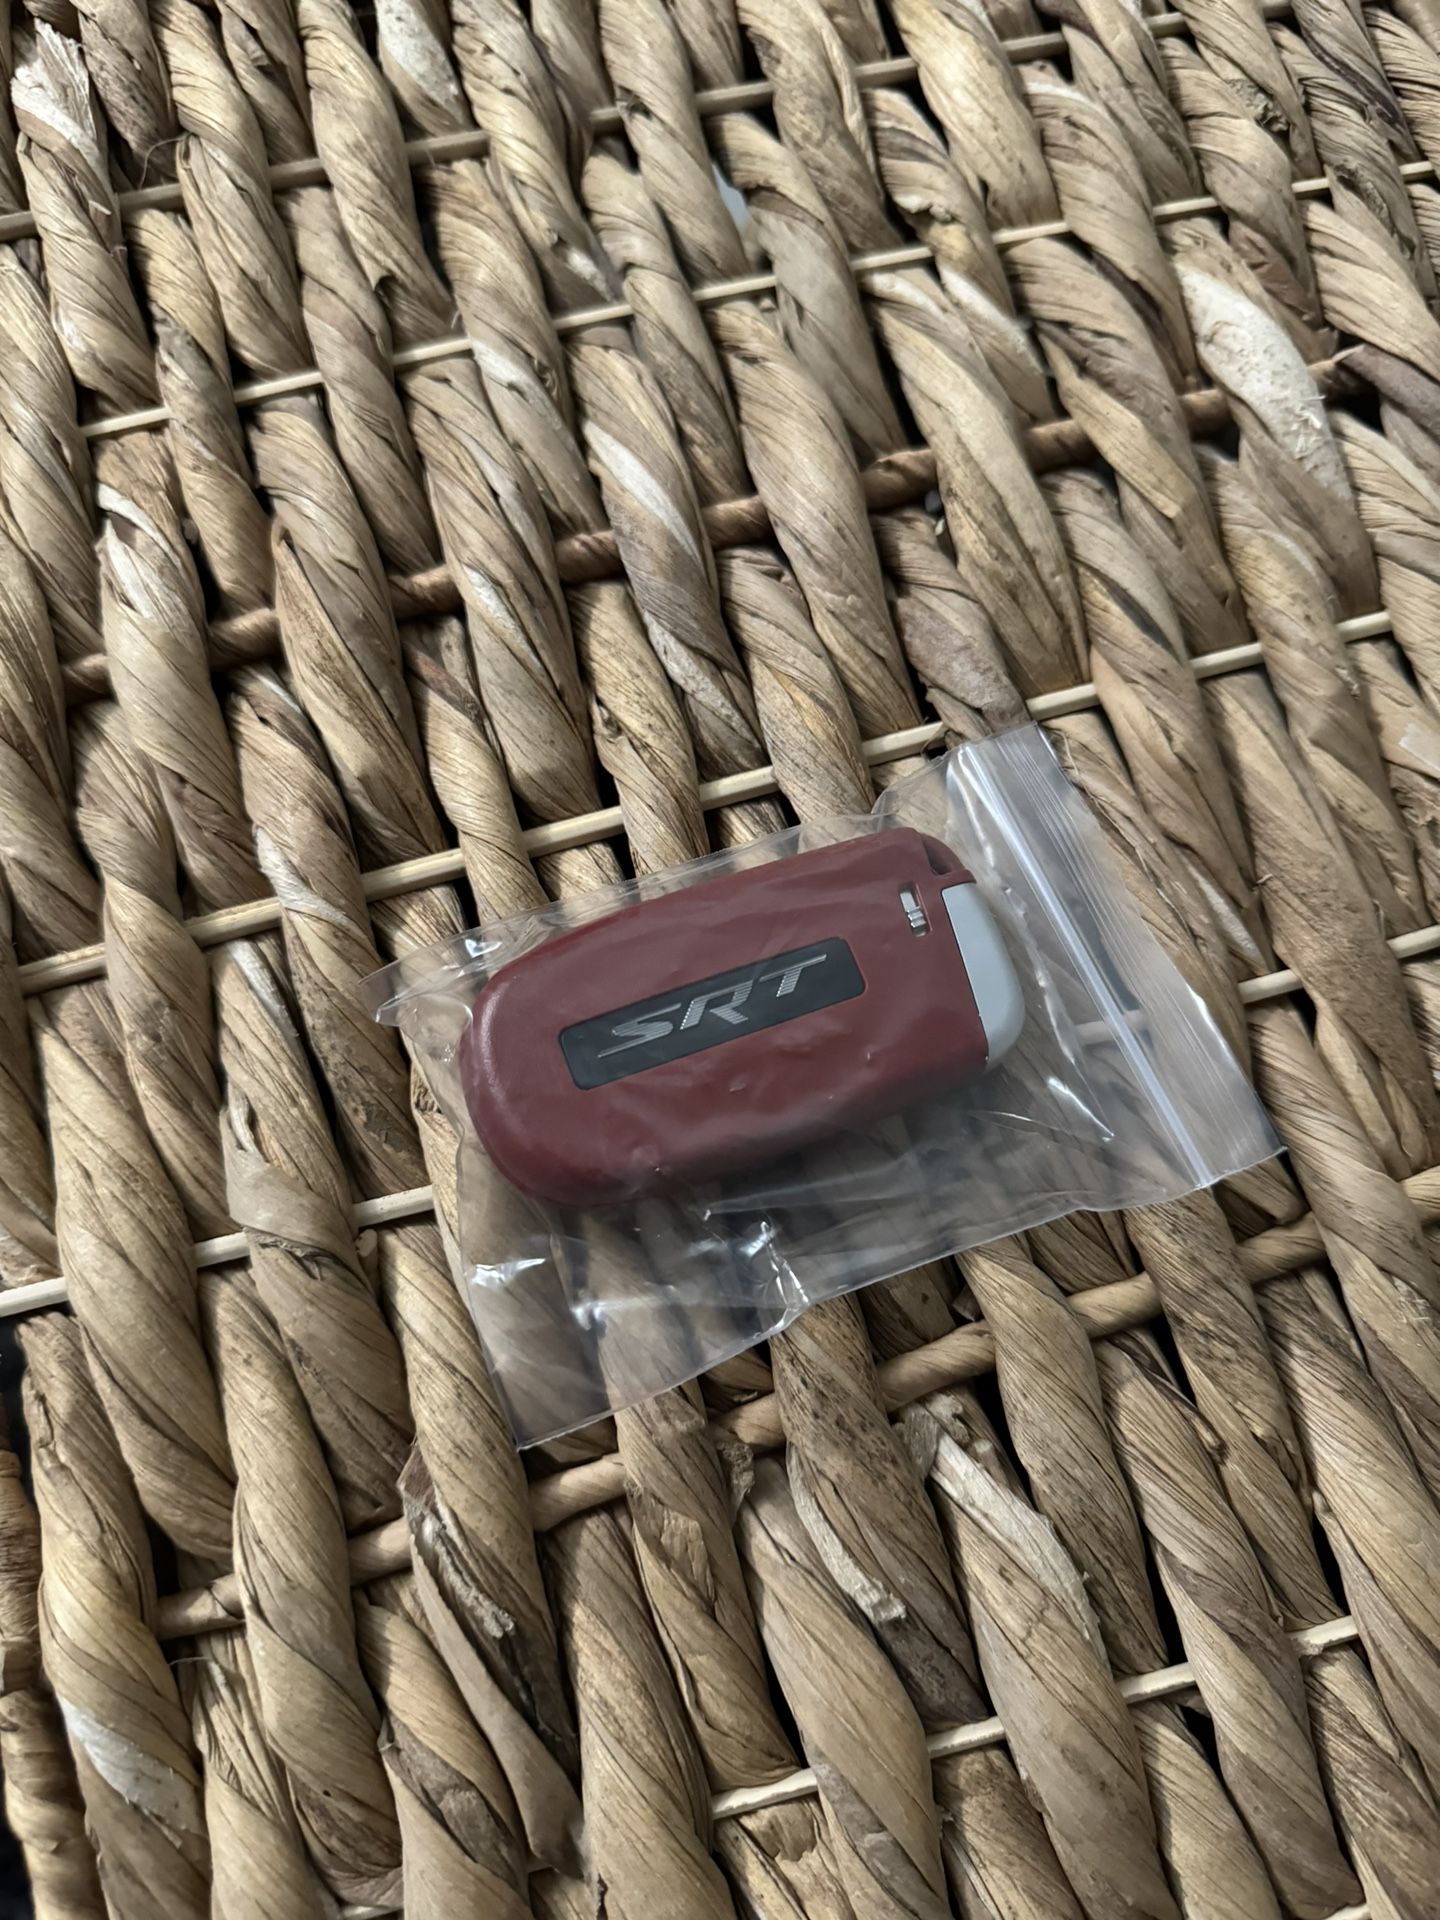 SRT Key Fob Replacement Key FOR Any Dodge Scatpack Hellcat SRT Trackhawk (WORKS ON ANY DODGE)